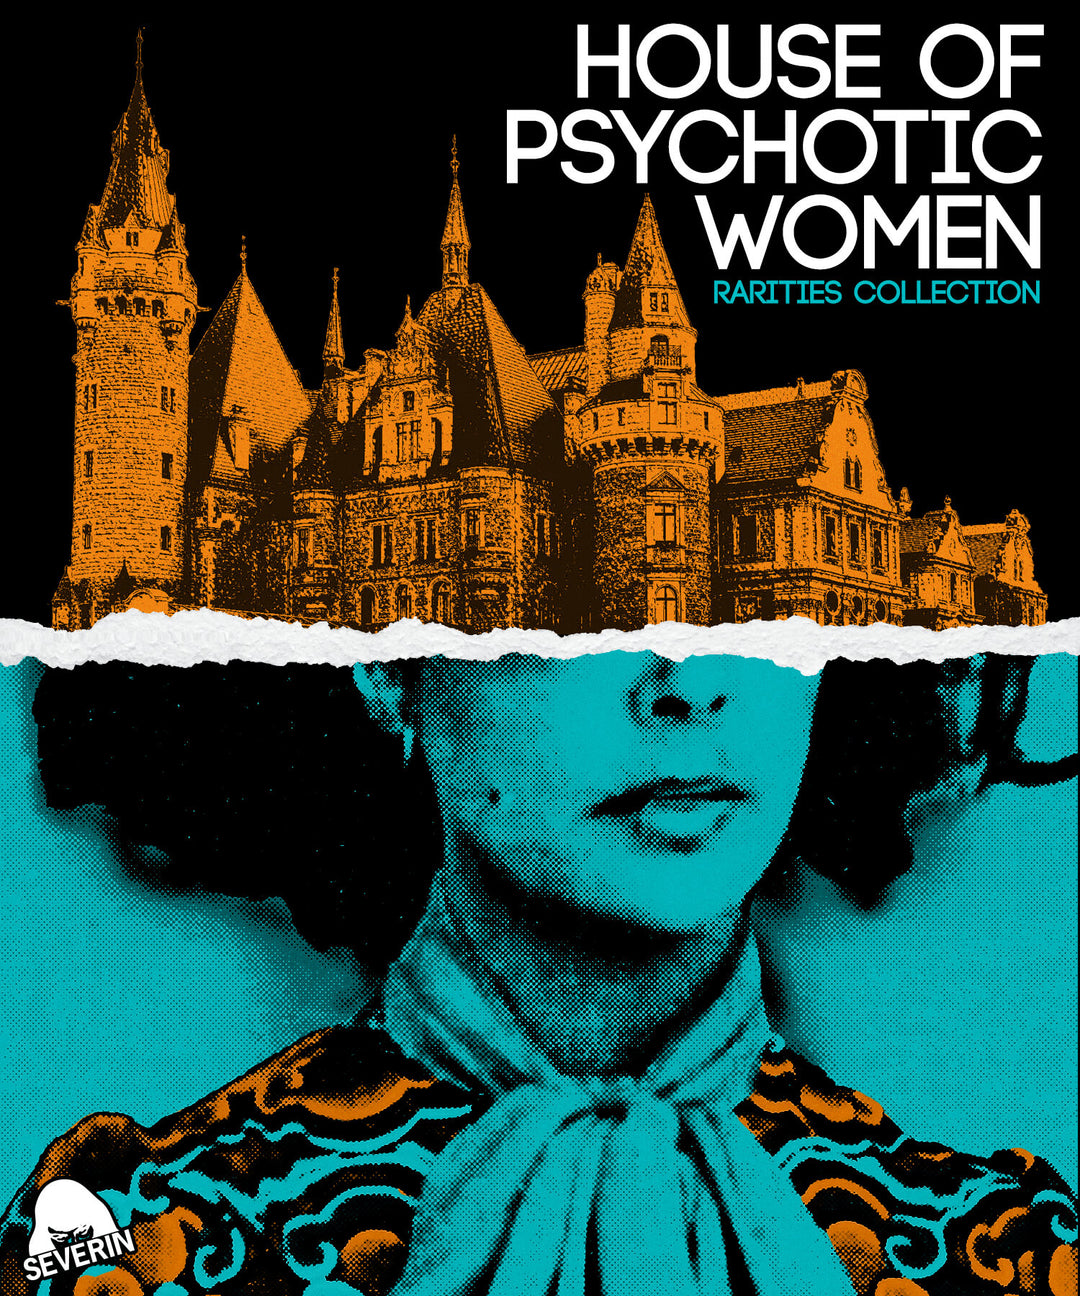 House of Psychotic Women Rarities Collection